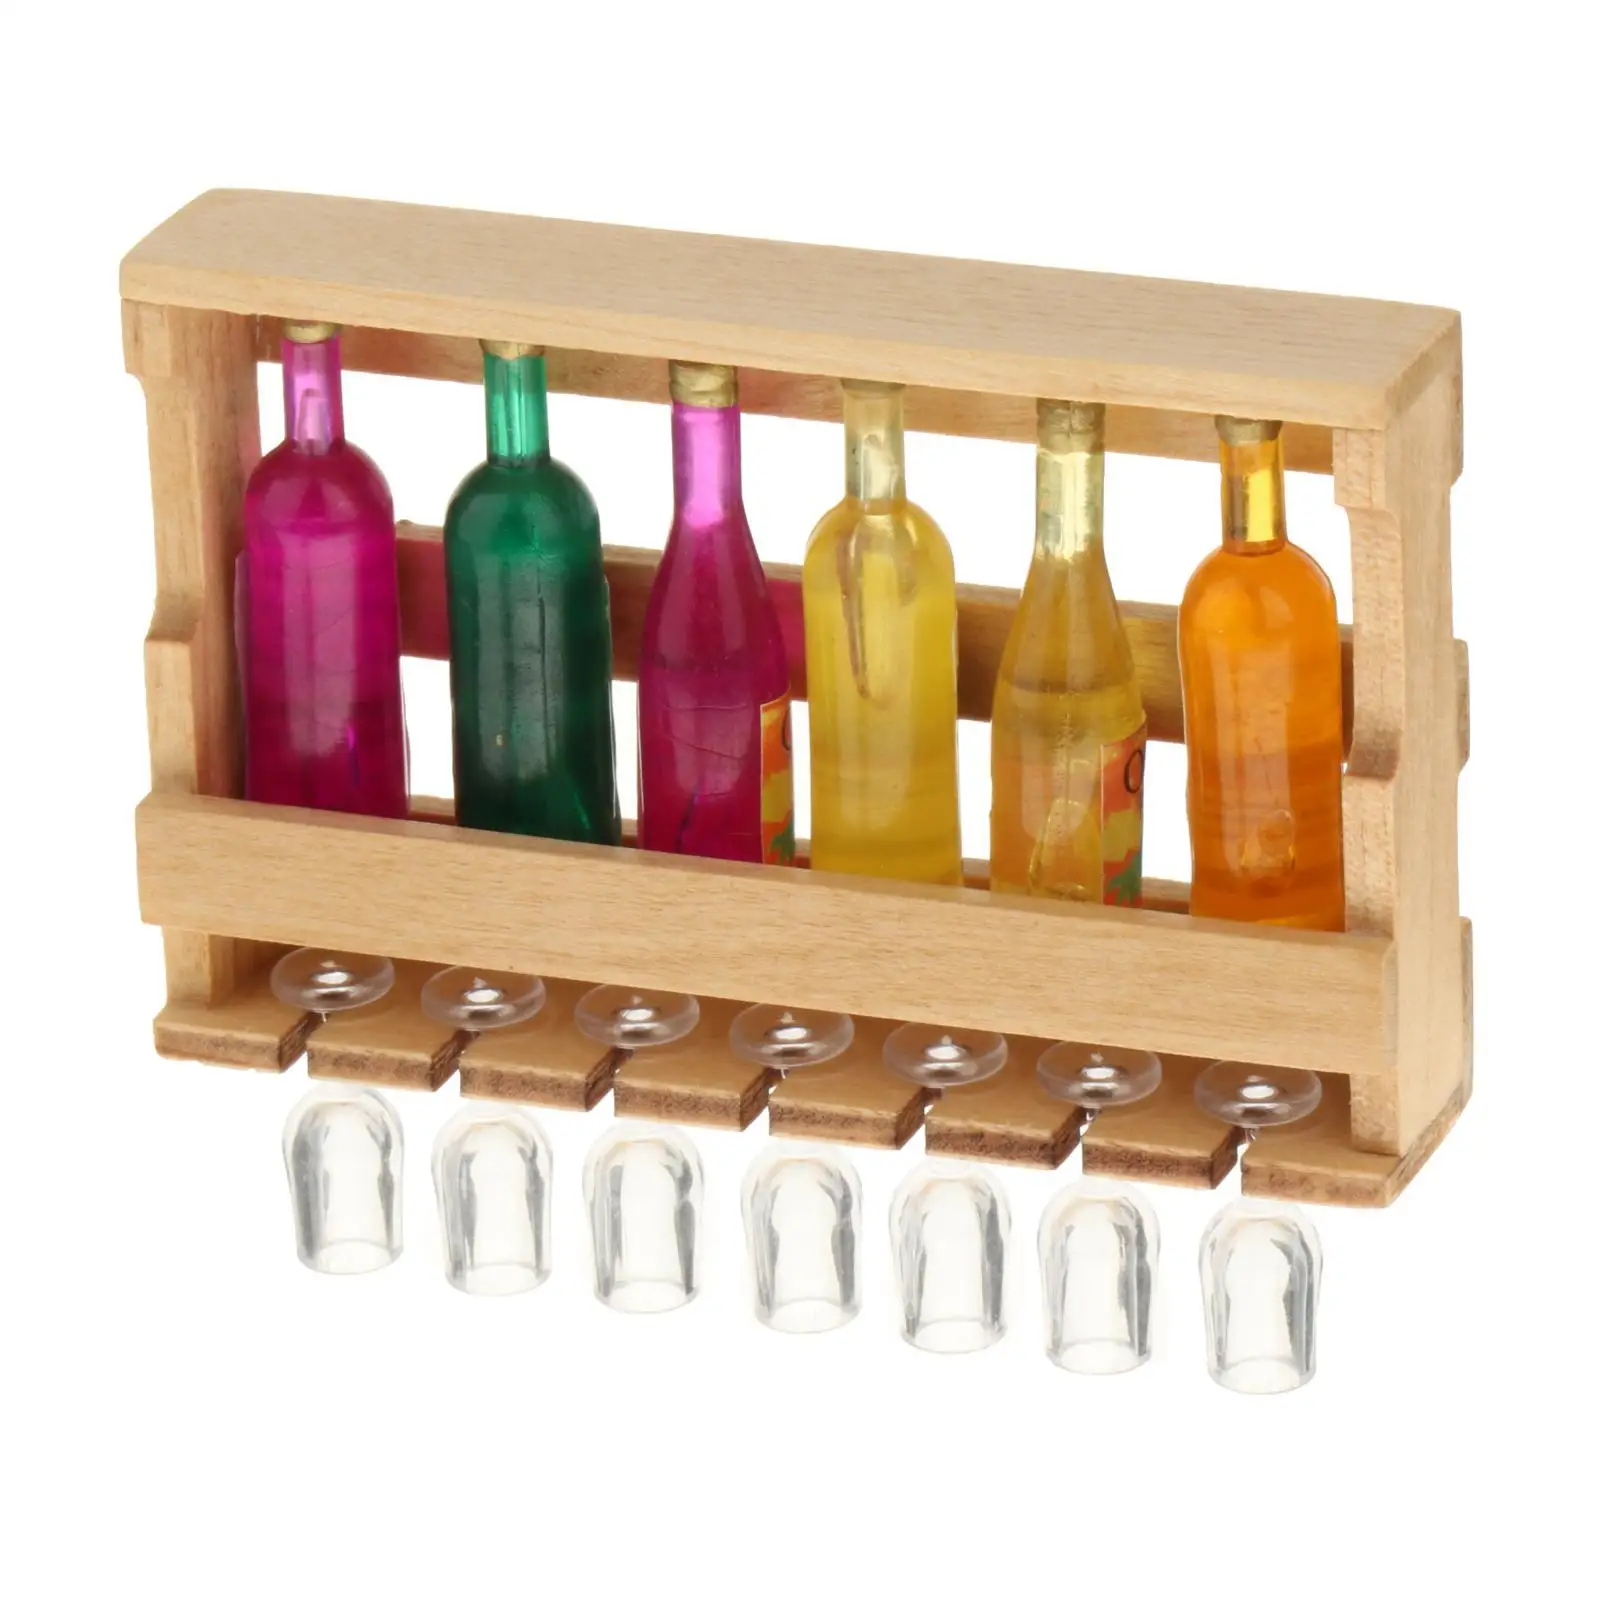 14 Pieces 1:12 Dollhouse Miniature Wine Rack with Bottles and Glass Cup Toys